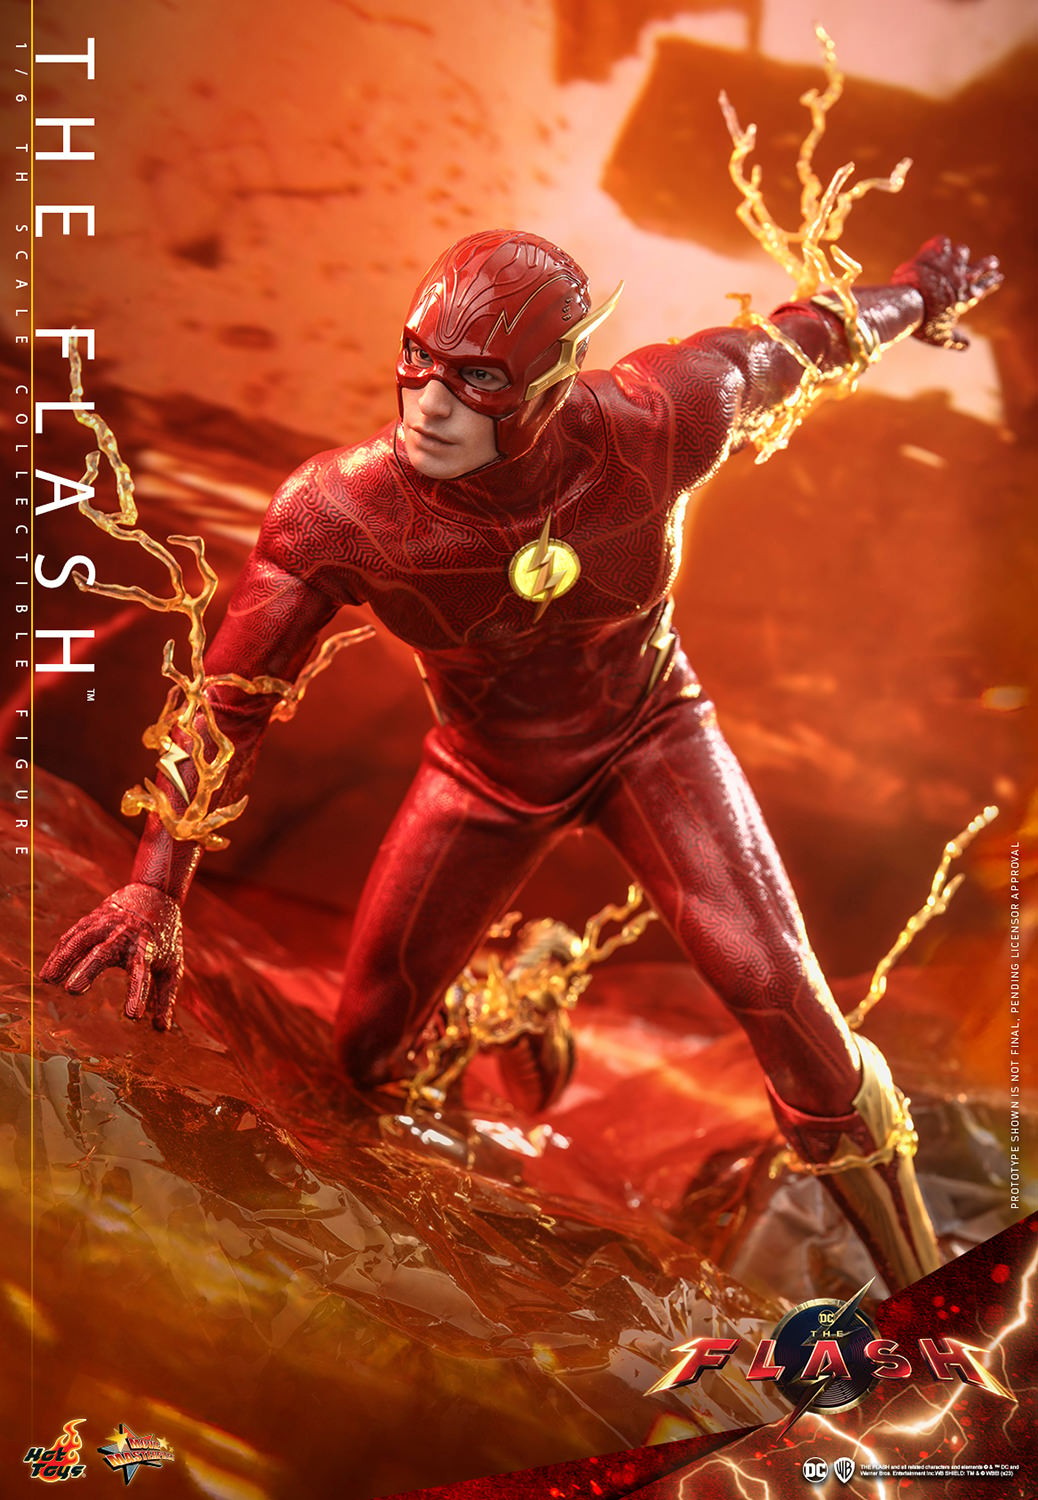 The Flash Collector Edition (Prototype Shown) View 10